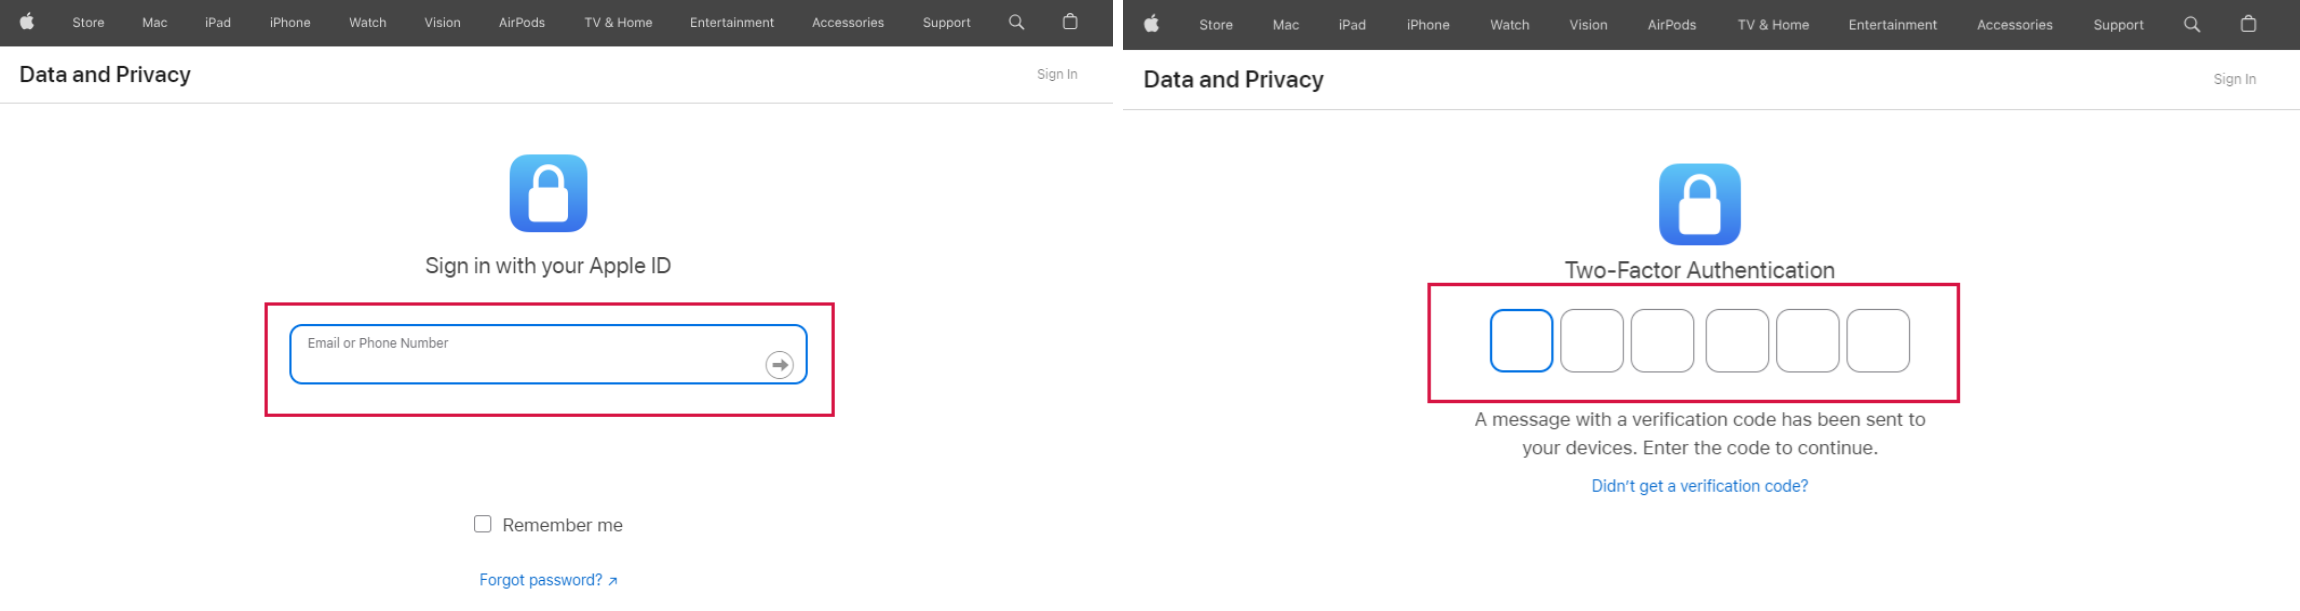 Log In To the Apple Data and Privacy Page